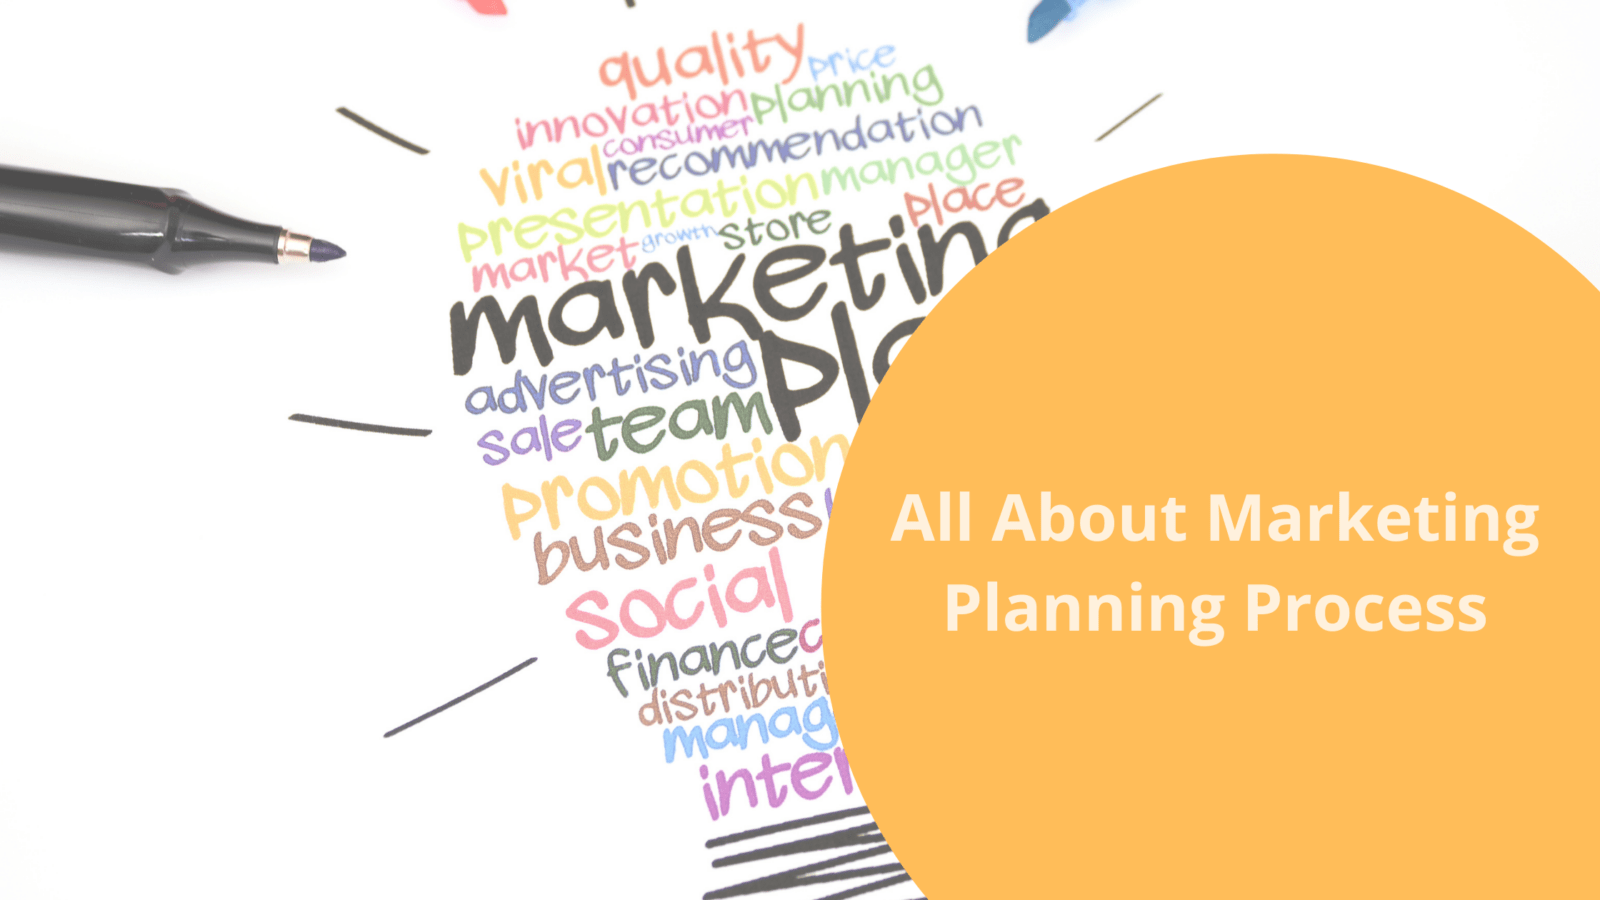 Everything you need to know about the marketing planning process | bookafy